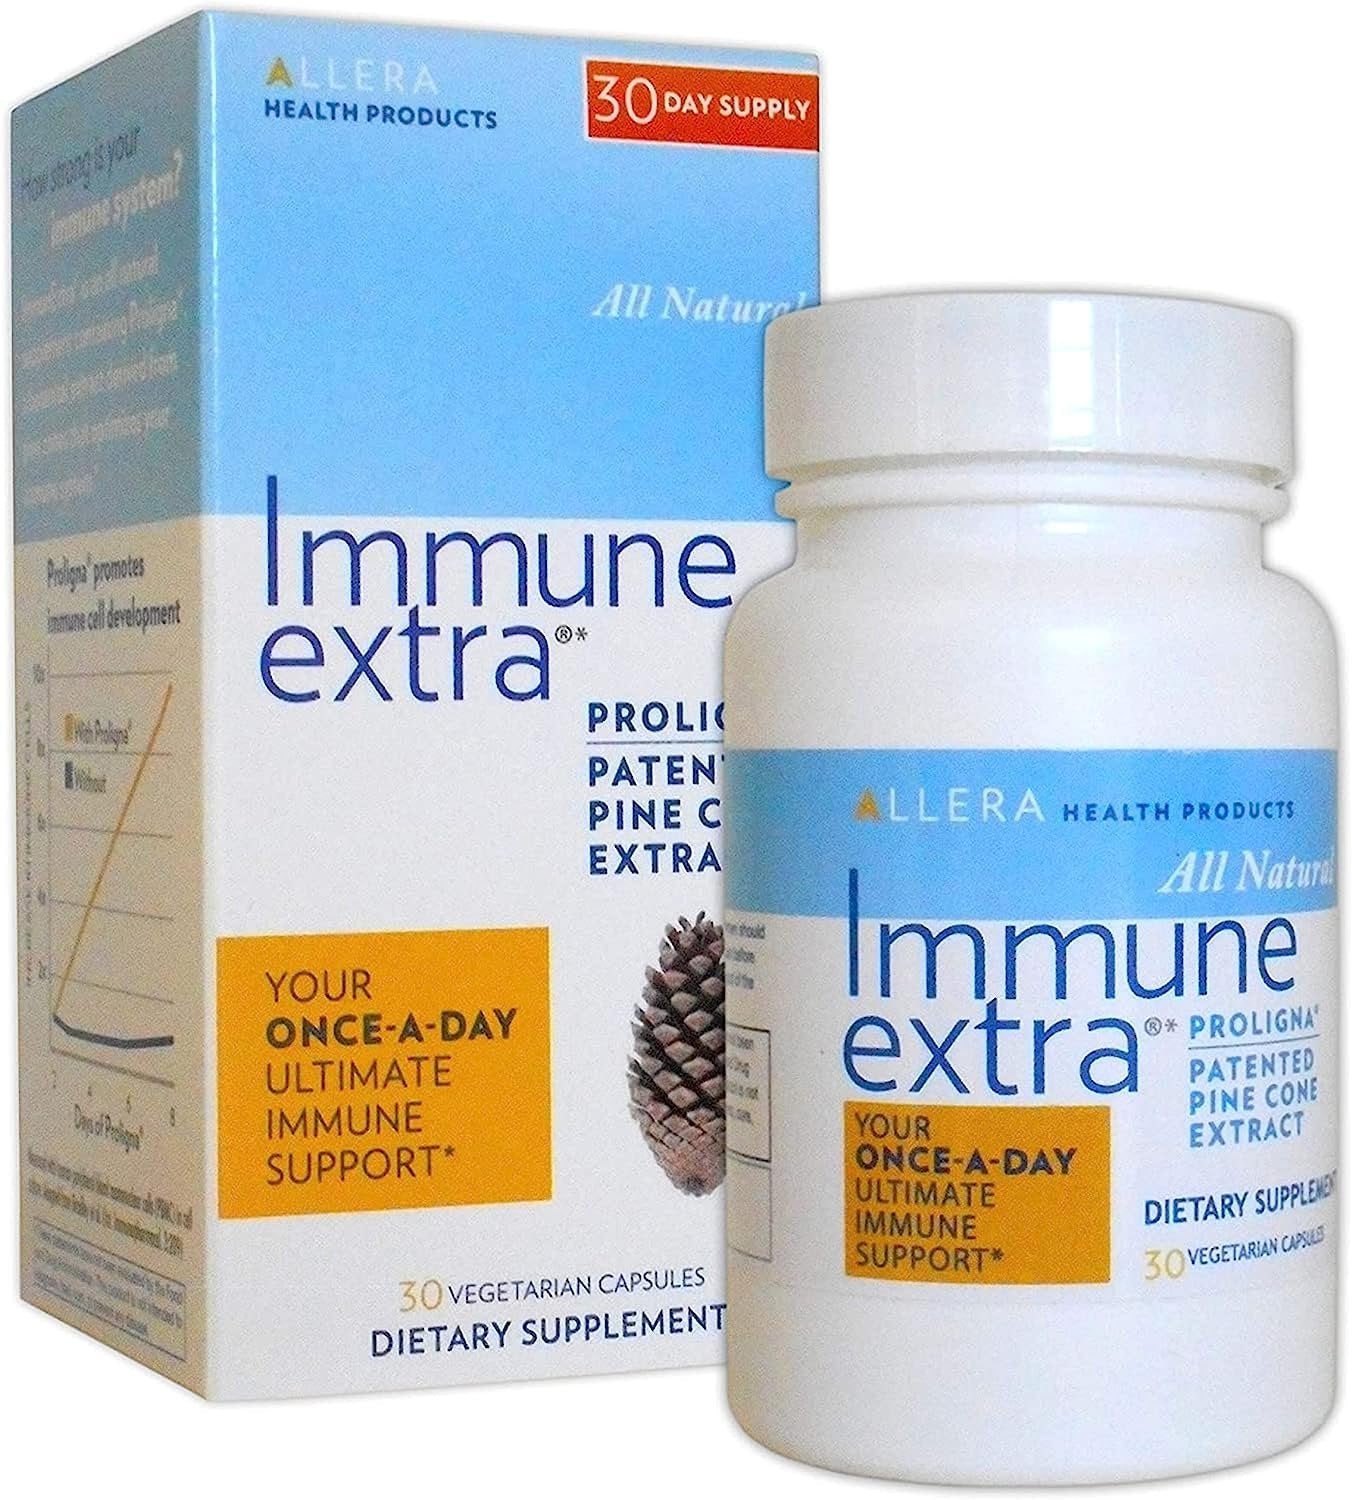 IMMUNEXTRA Allera Health Pine Cone Extract Capsules - Vegan ProLigna Plant Based Diet Products - Immune Support Supplement - Organic Pine Pollen Powder Extract Harvested from Wild Crafted Trees